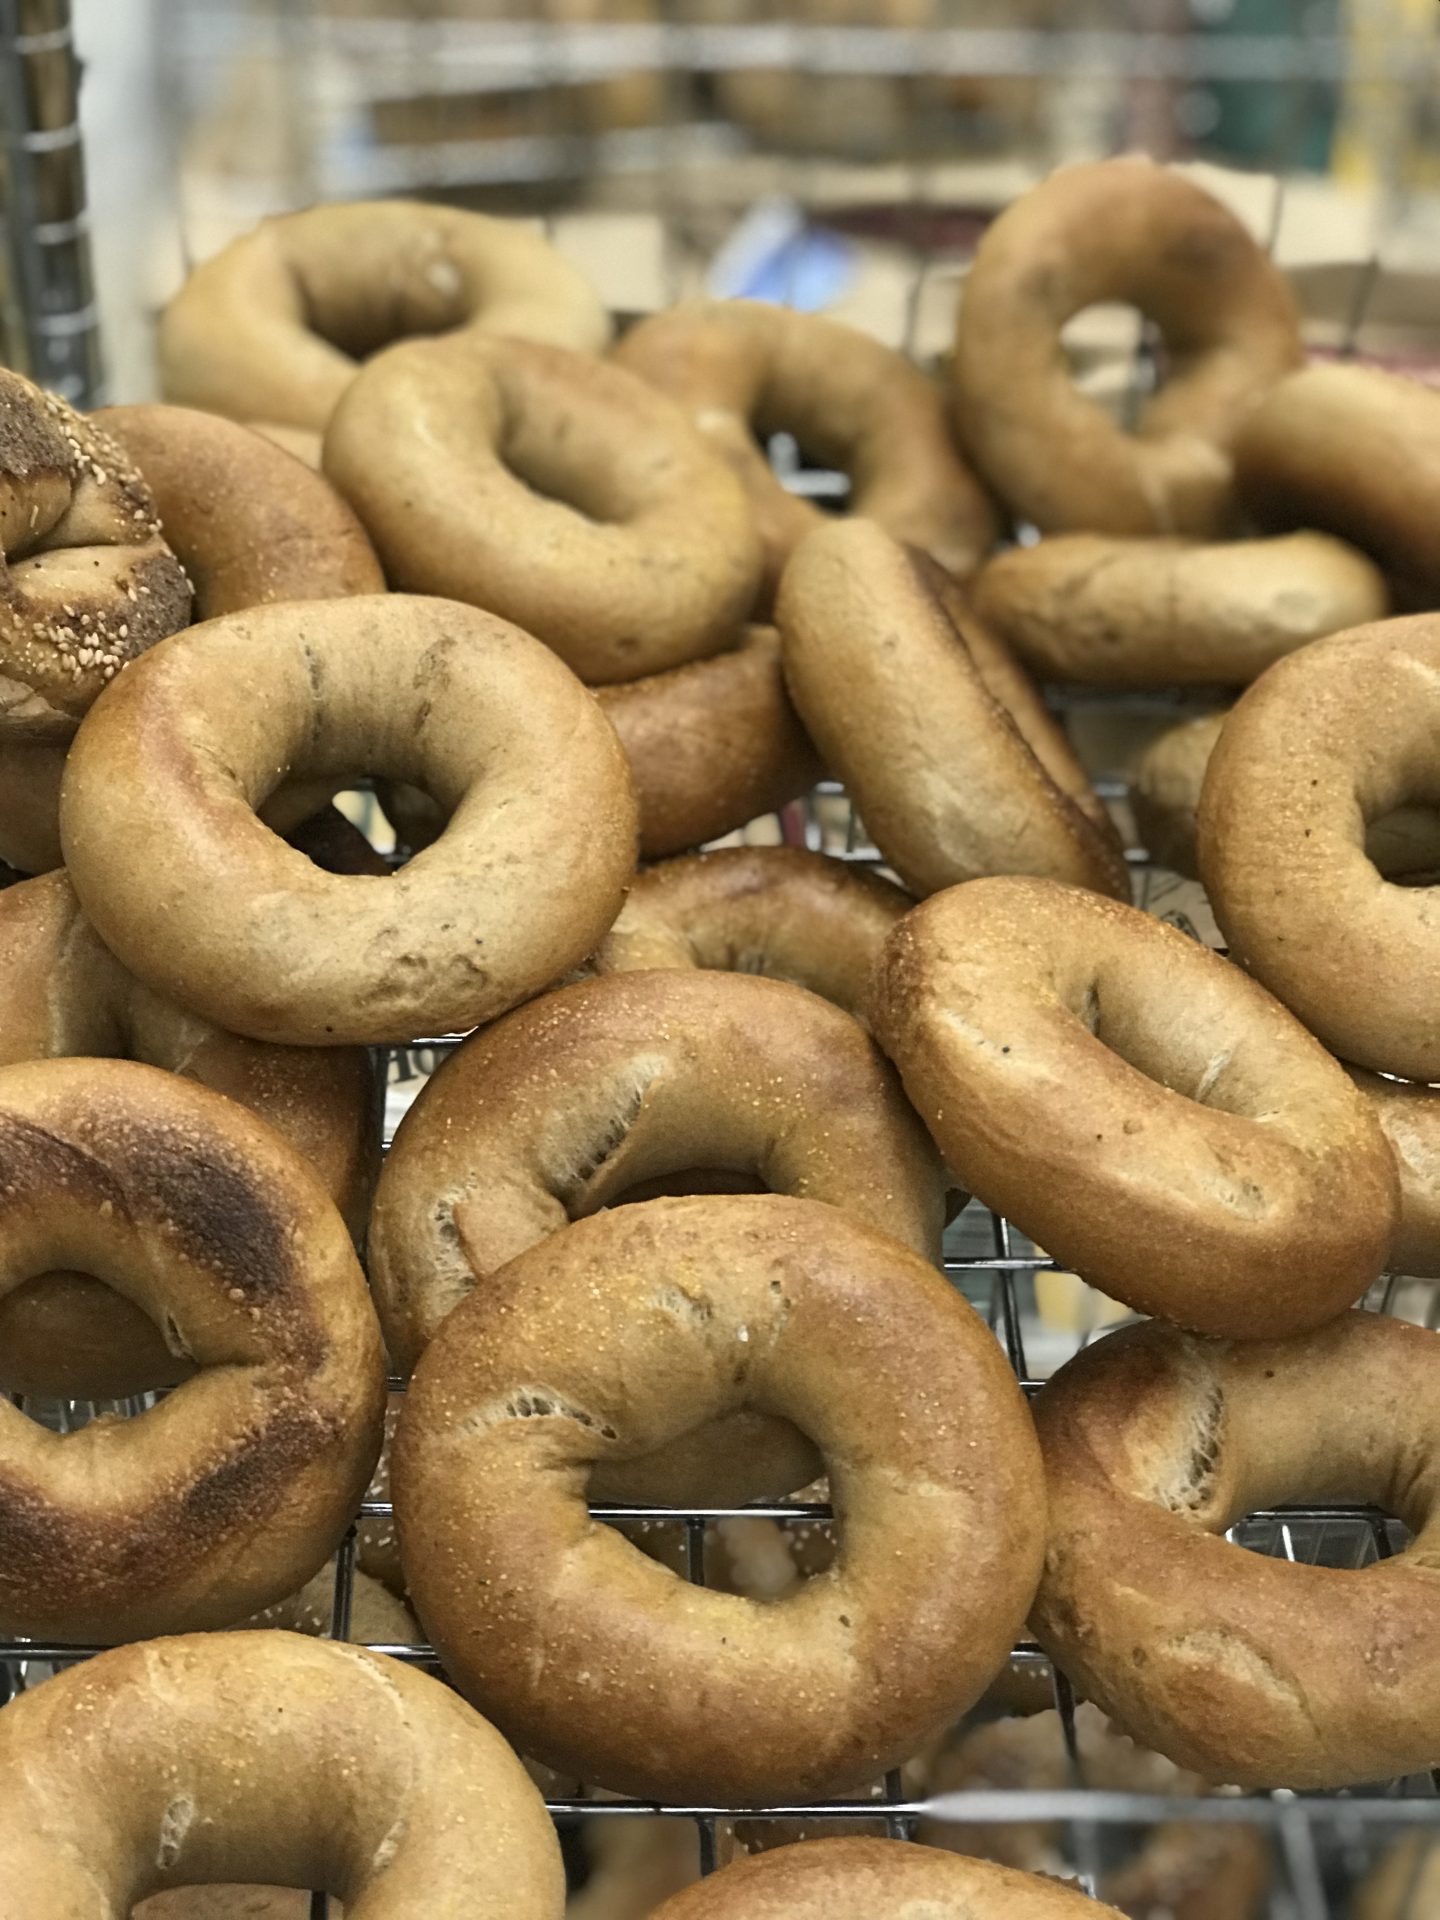 Tons and tons of bagels